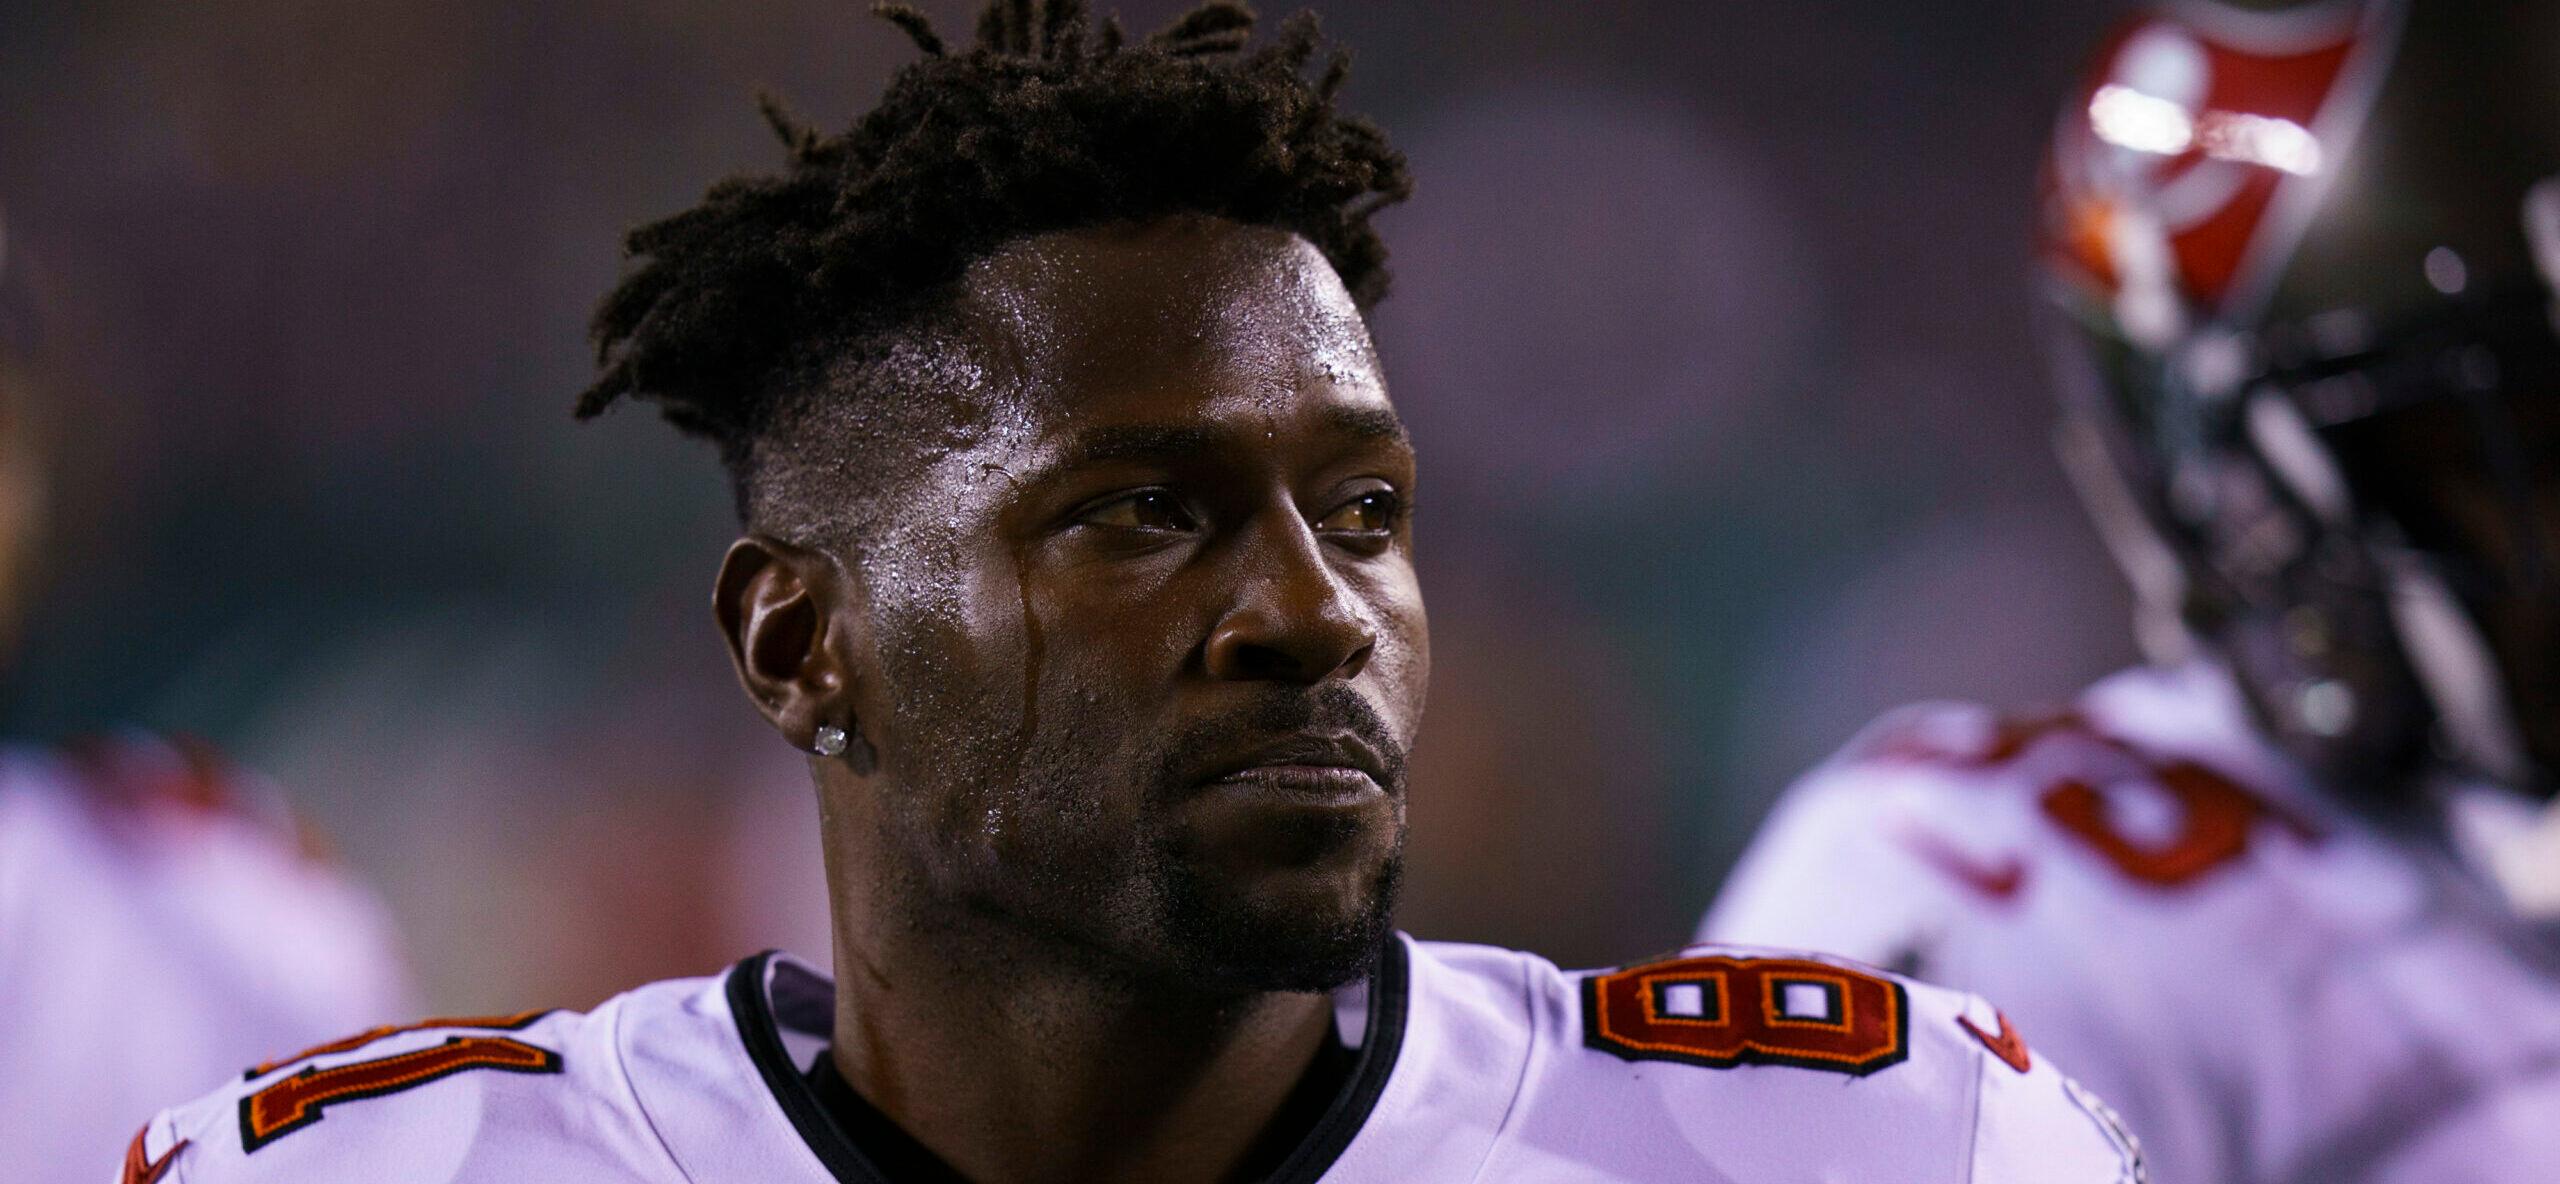 Antonio Brown Reportedly Had Sideline Outburst Over Refusal To Play With Injured Ankle